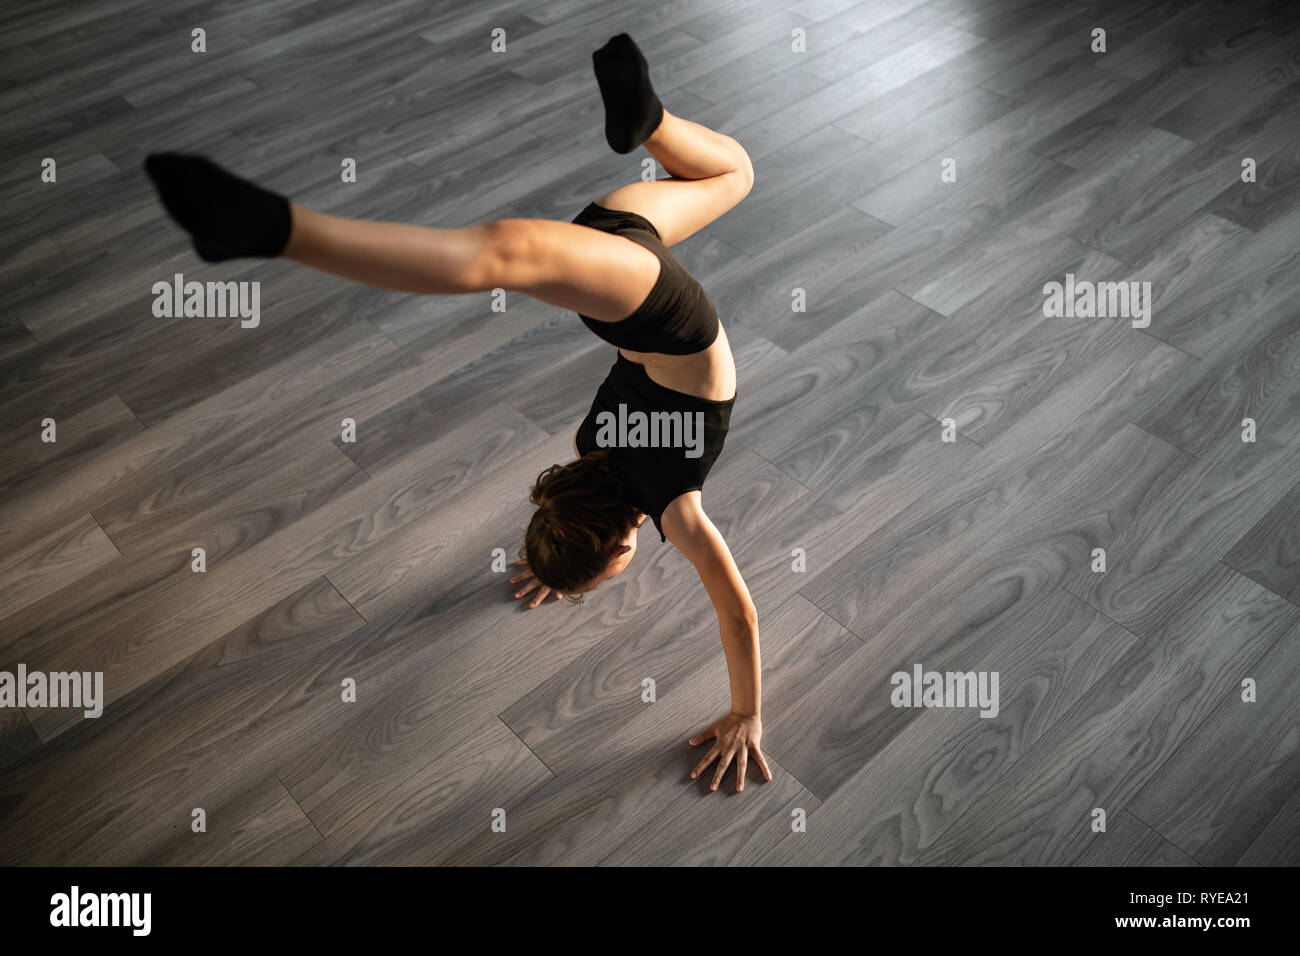 Sport, training, stretching, dancing active lifestyle concept. Young girl practicing dance Stock Photo